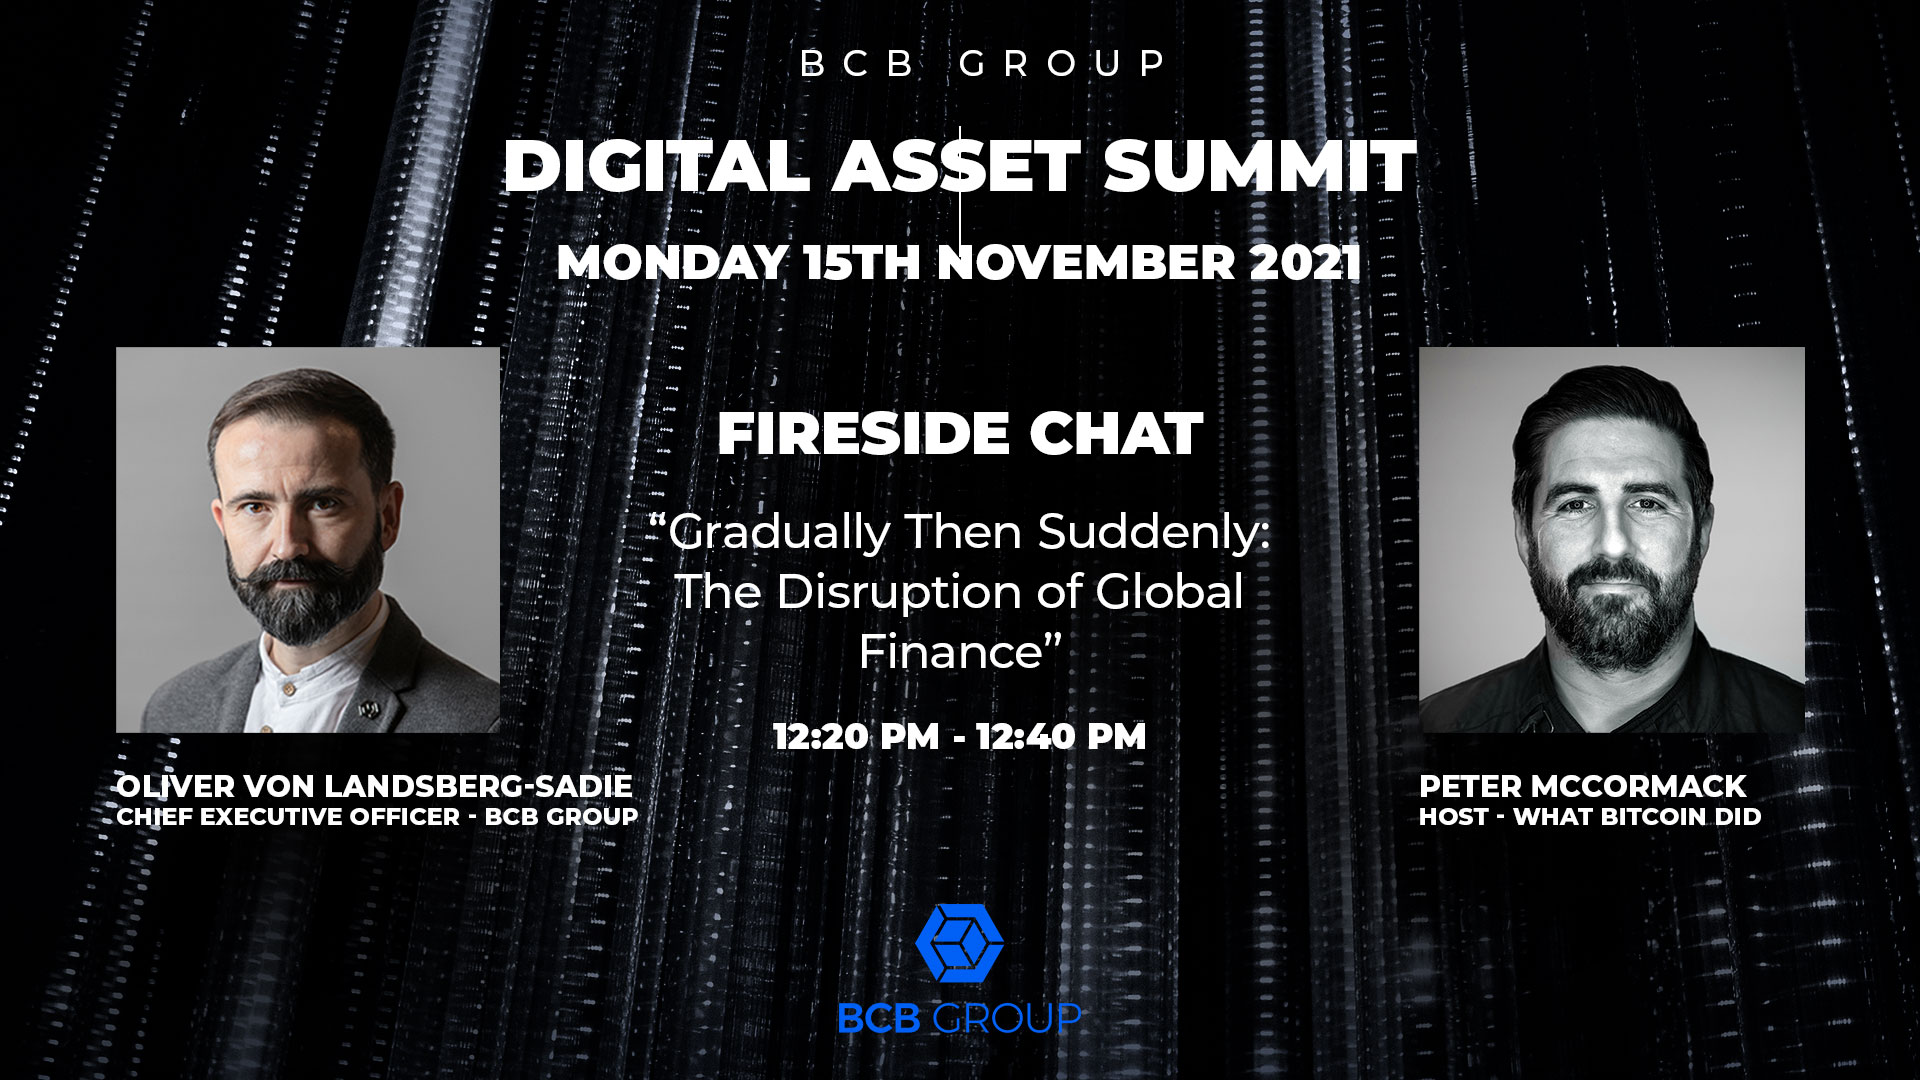 Fireside Chat information.